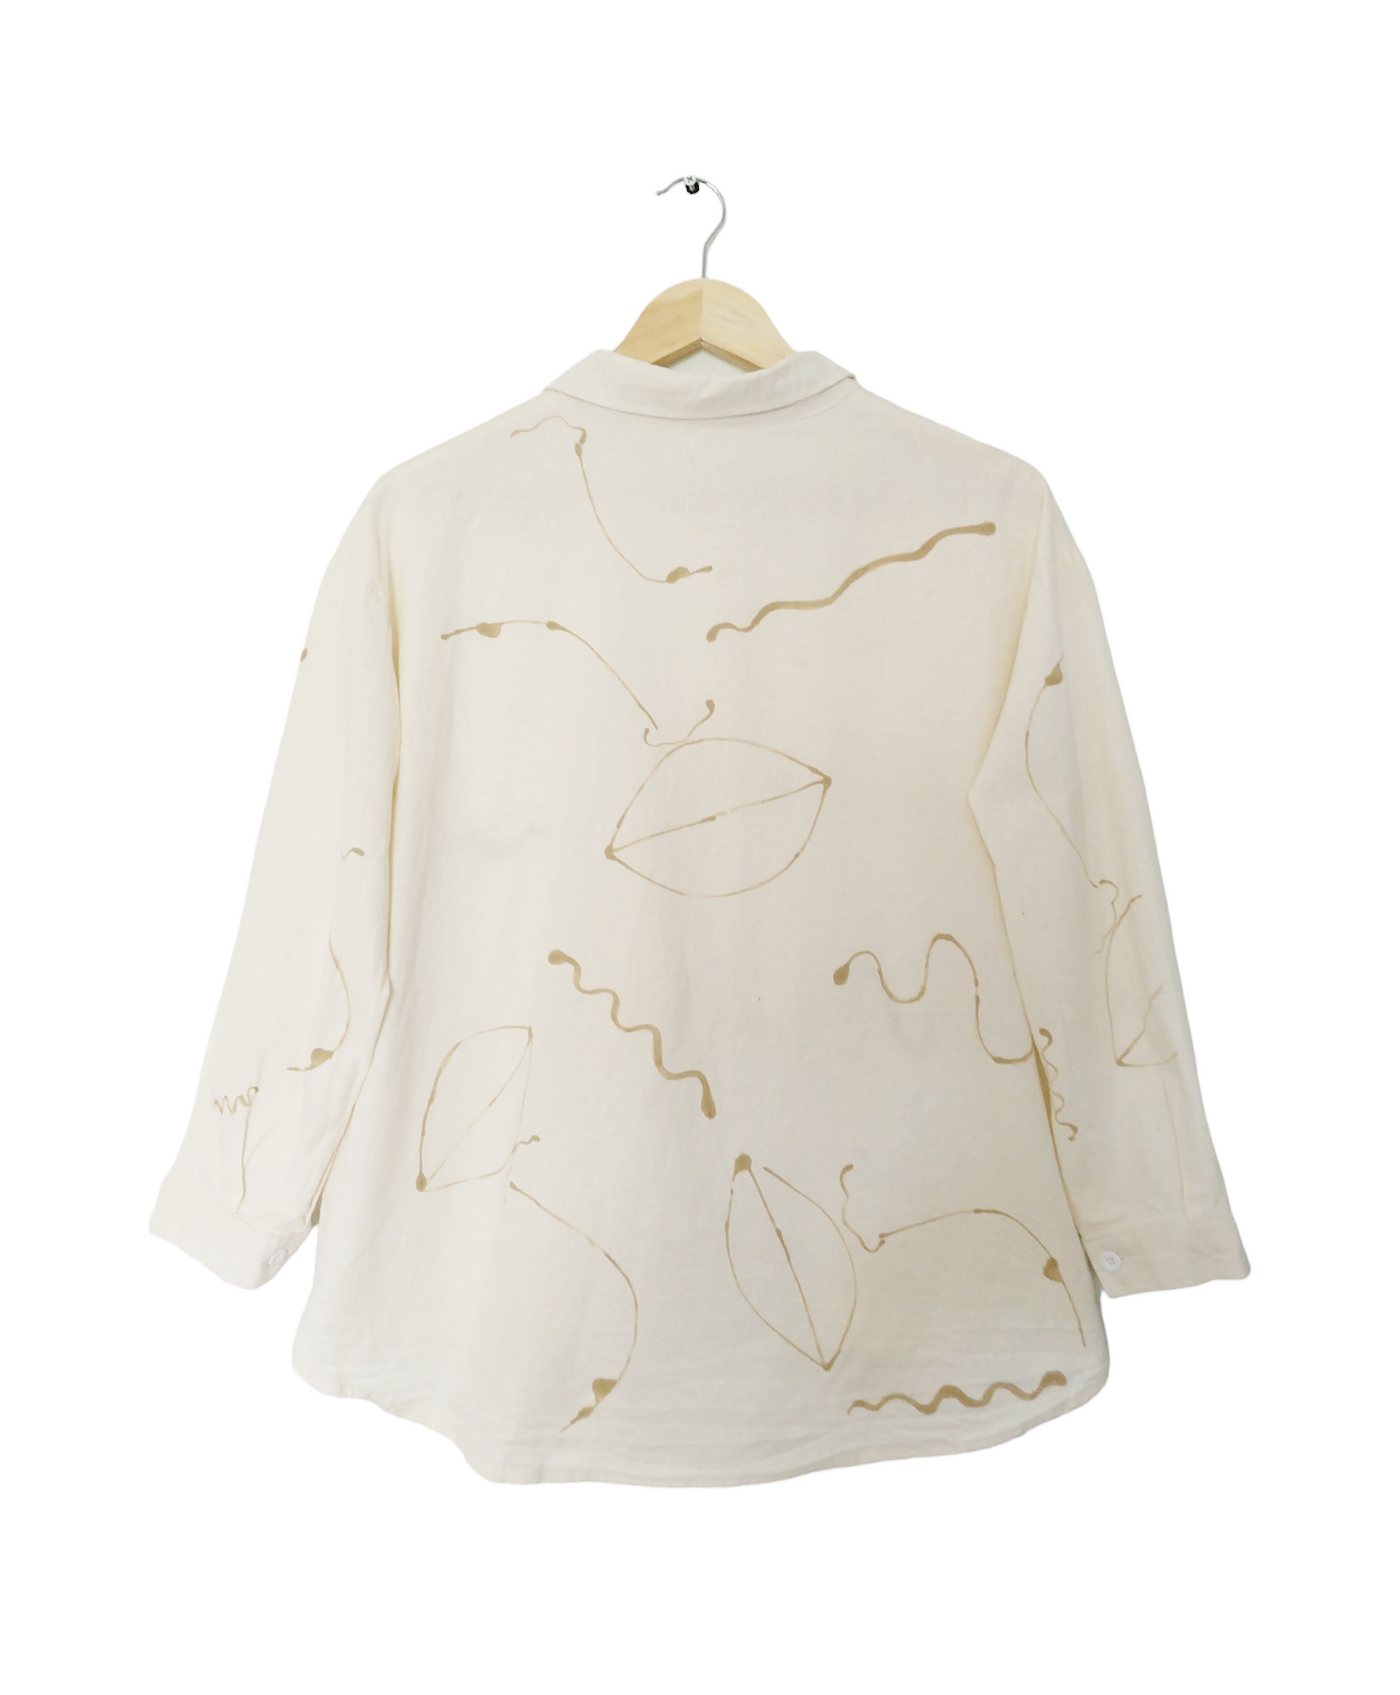 Aff & Jam Hand painted Ivory Pattern Shirt - Radical Giving